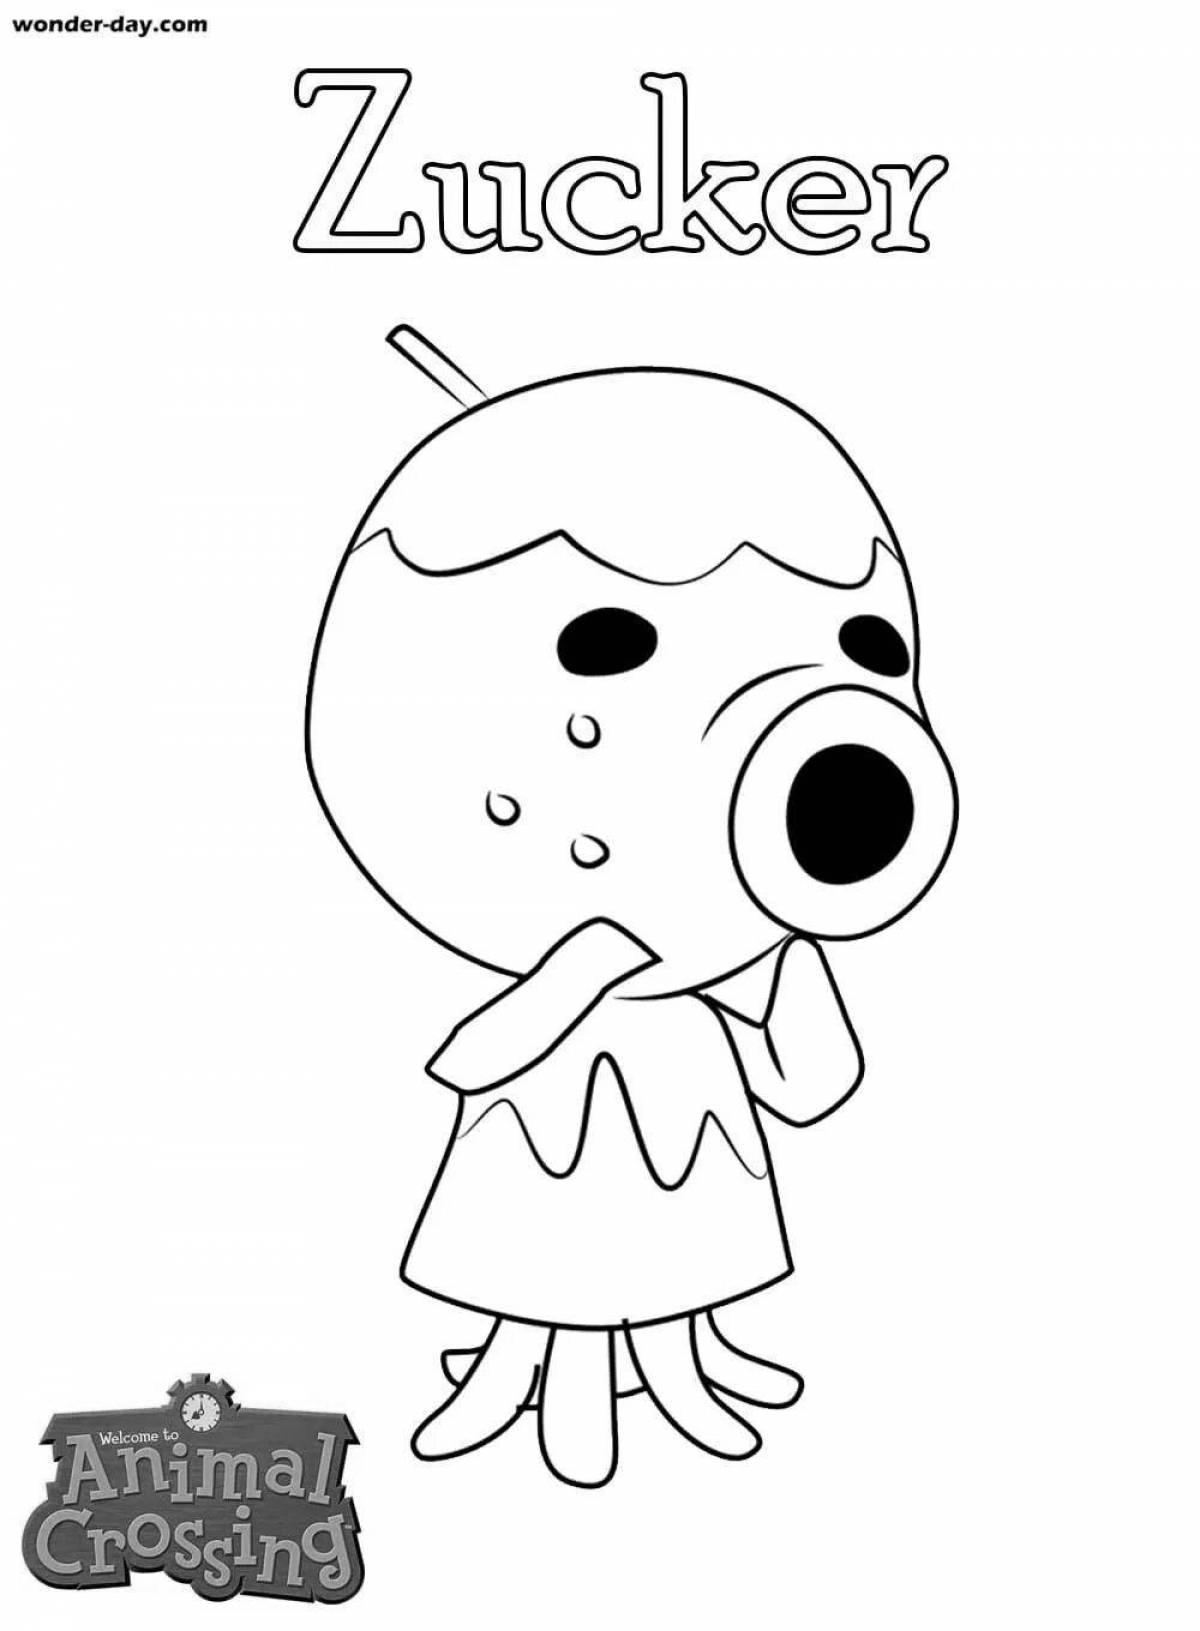 Wonder day coloring page